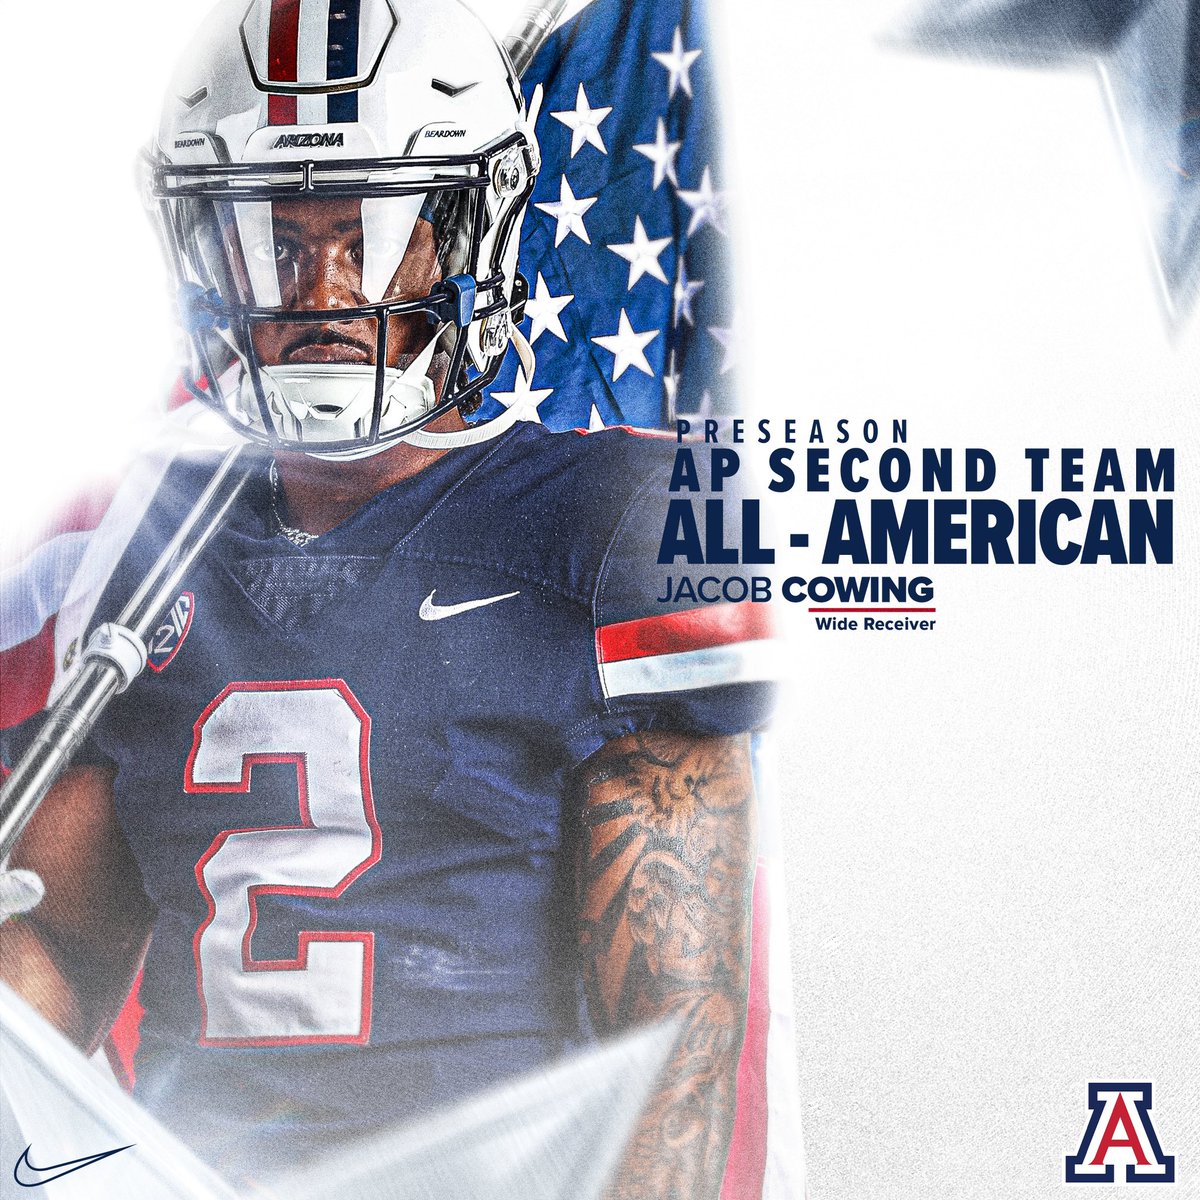 𝐀𝐋𝐋-𝐀𝐌𝐄𝐑𝐈𝐂𝐀𝐍 Congratulations to @jaycowing_ for being selected @AP_Top25 Preseason 2nd Team All-American. 🏆 #ItsPersonal | #DesertFury